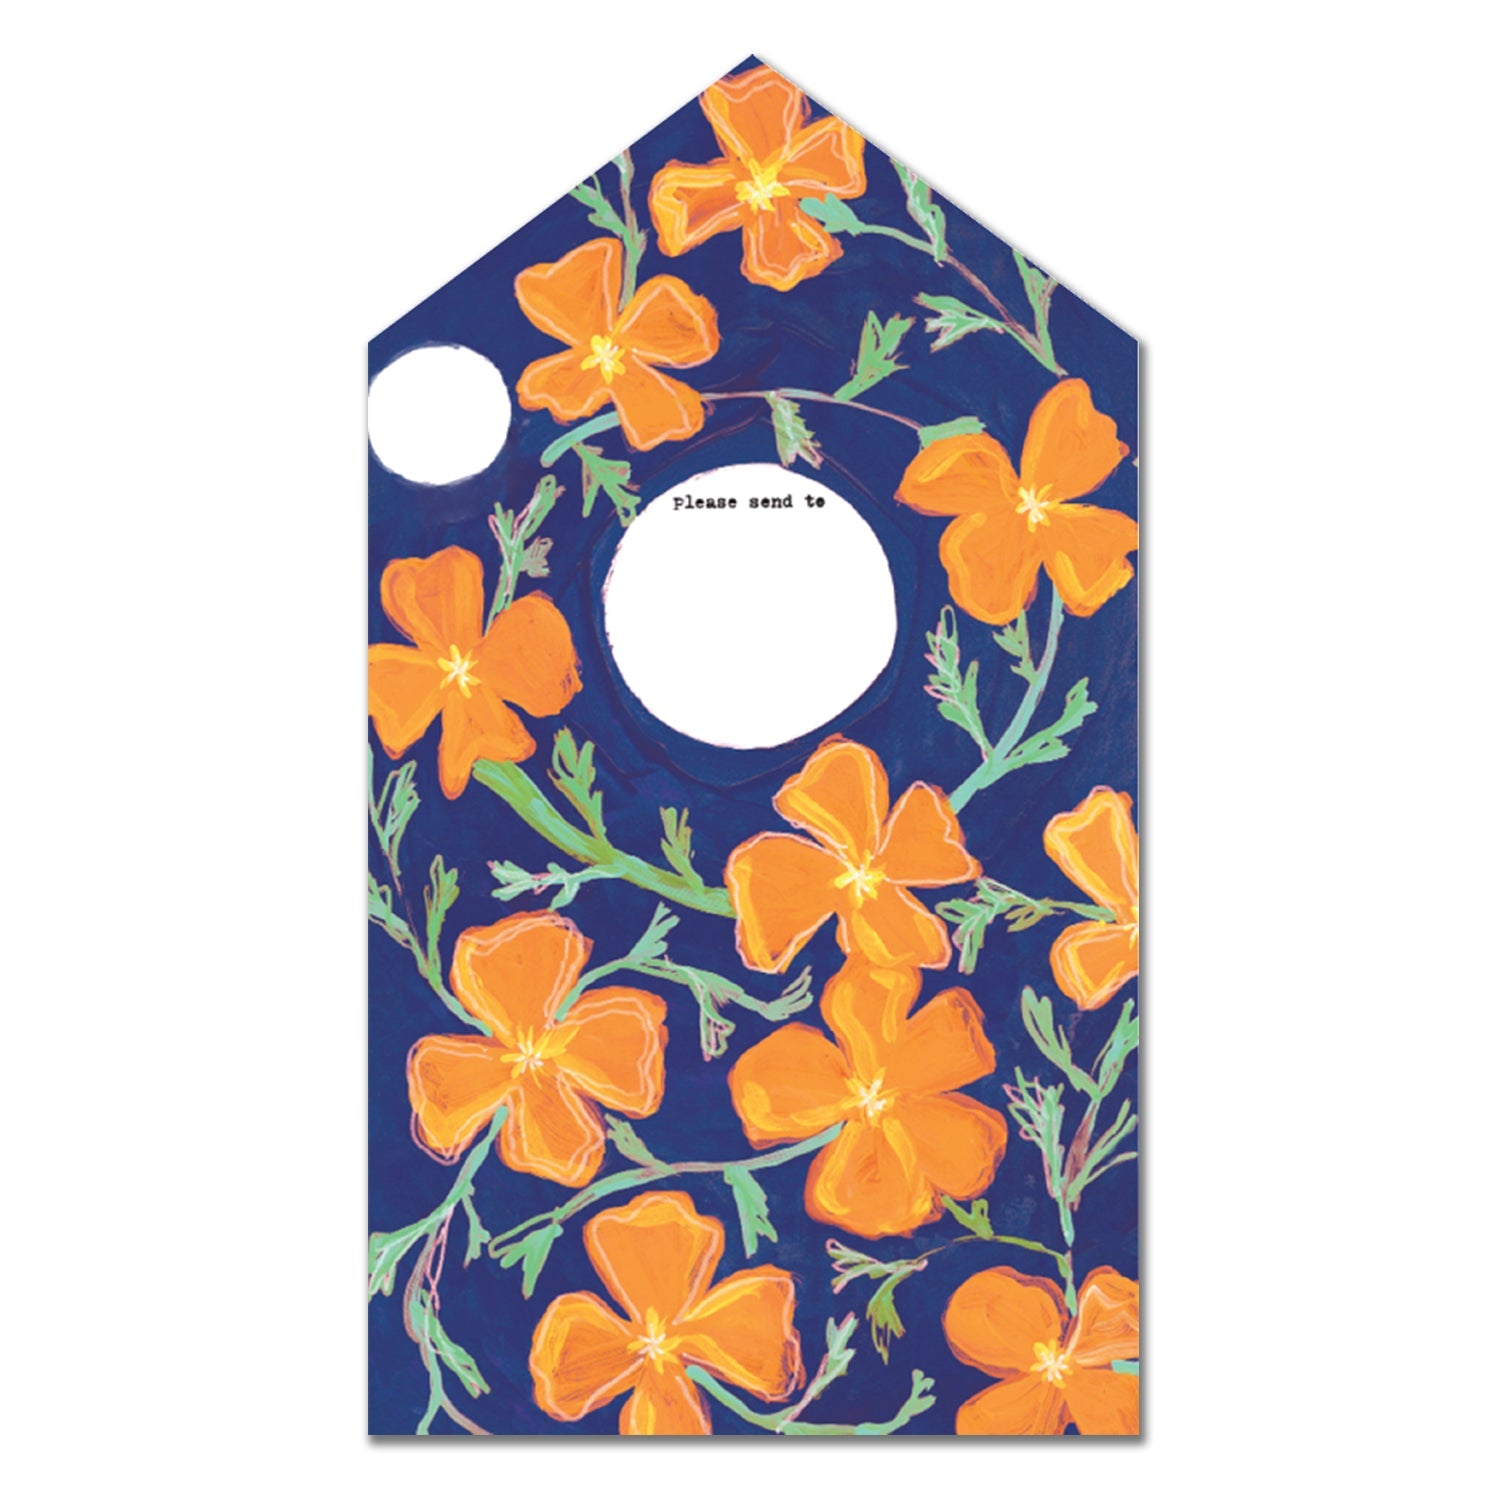 California Poppies · Instant Artful Envelope Stationery - Tiny and Snail